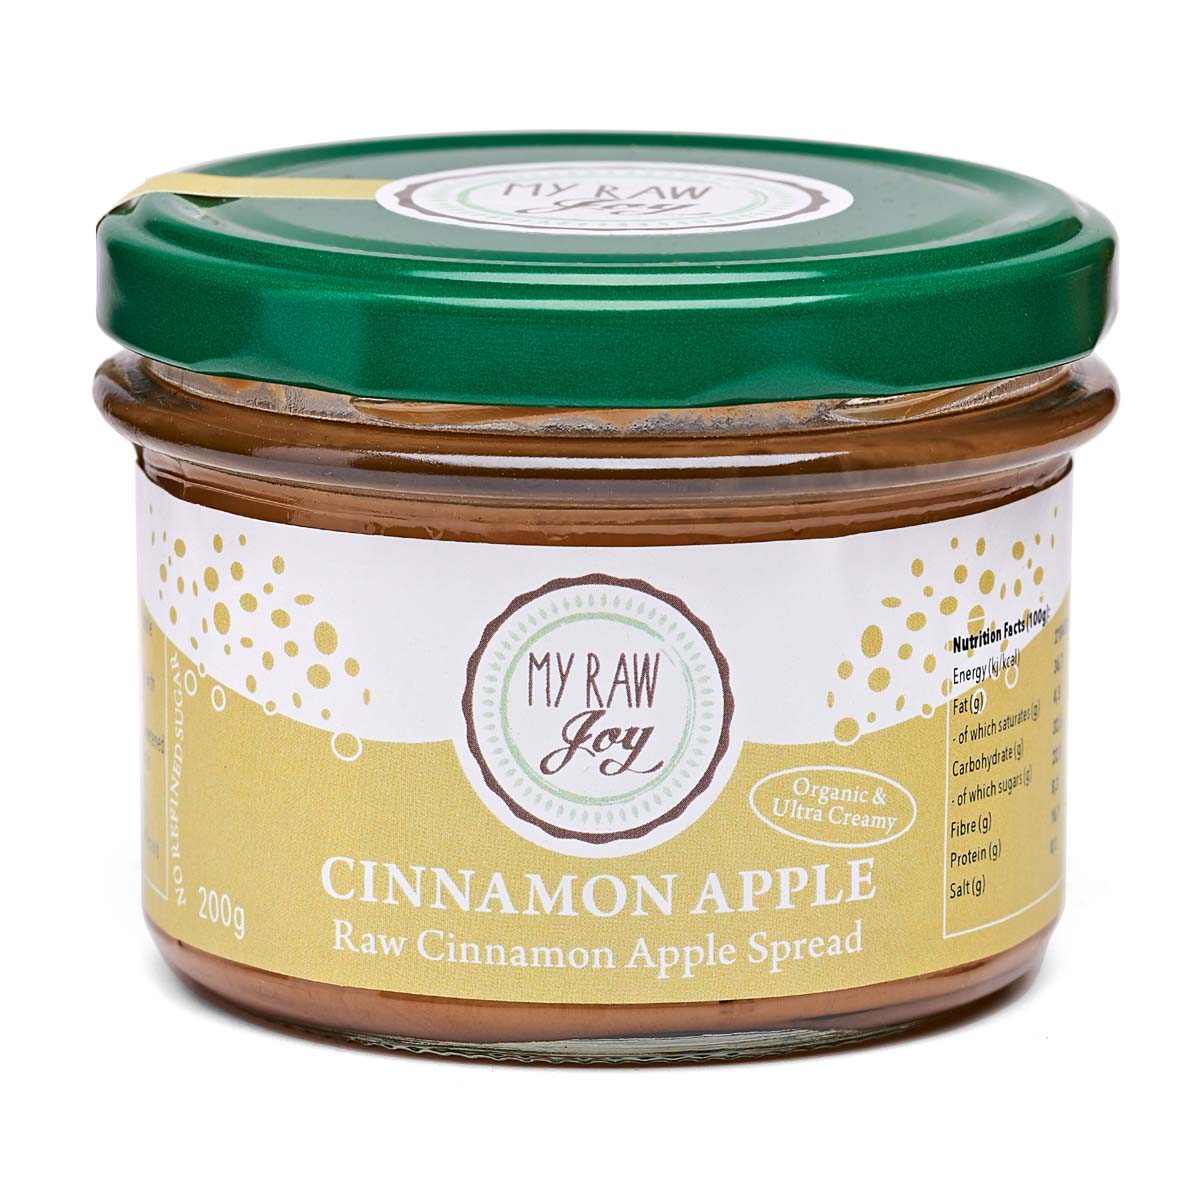 Activated Cinnamon Apple Spread | My Raw Joy | Raw Living UK | Raw Foods | Nut Butters | My Raw Joy Activated Cinnamon Apple Spread is a Raw Vegan Activated Almond Nut Butter made with Apples &amp; Cinnamon for a classically fruity cream spread.